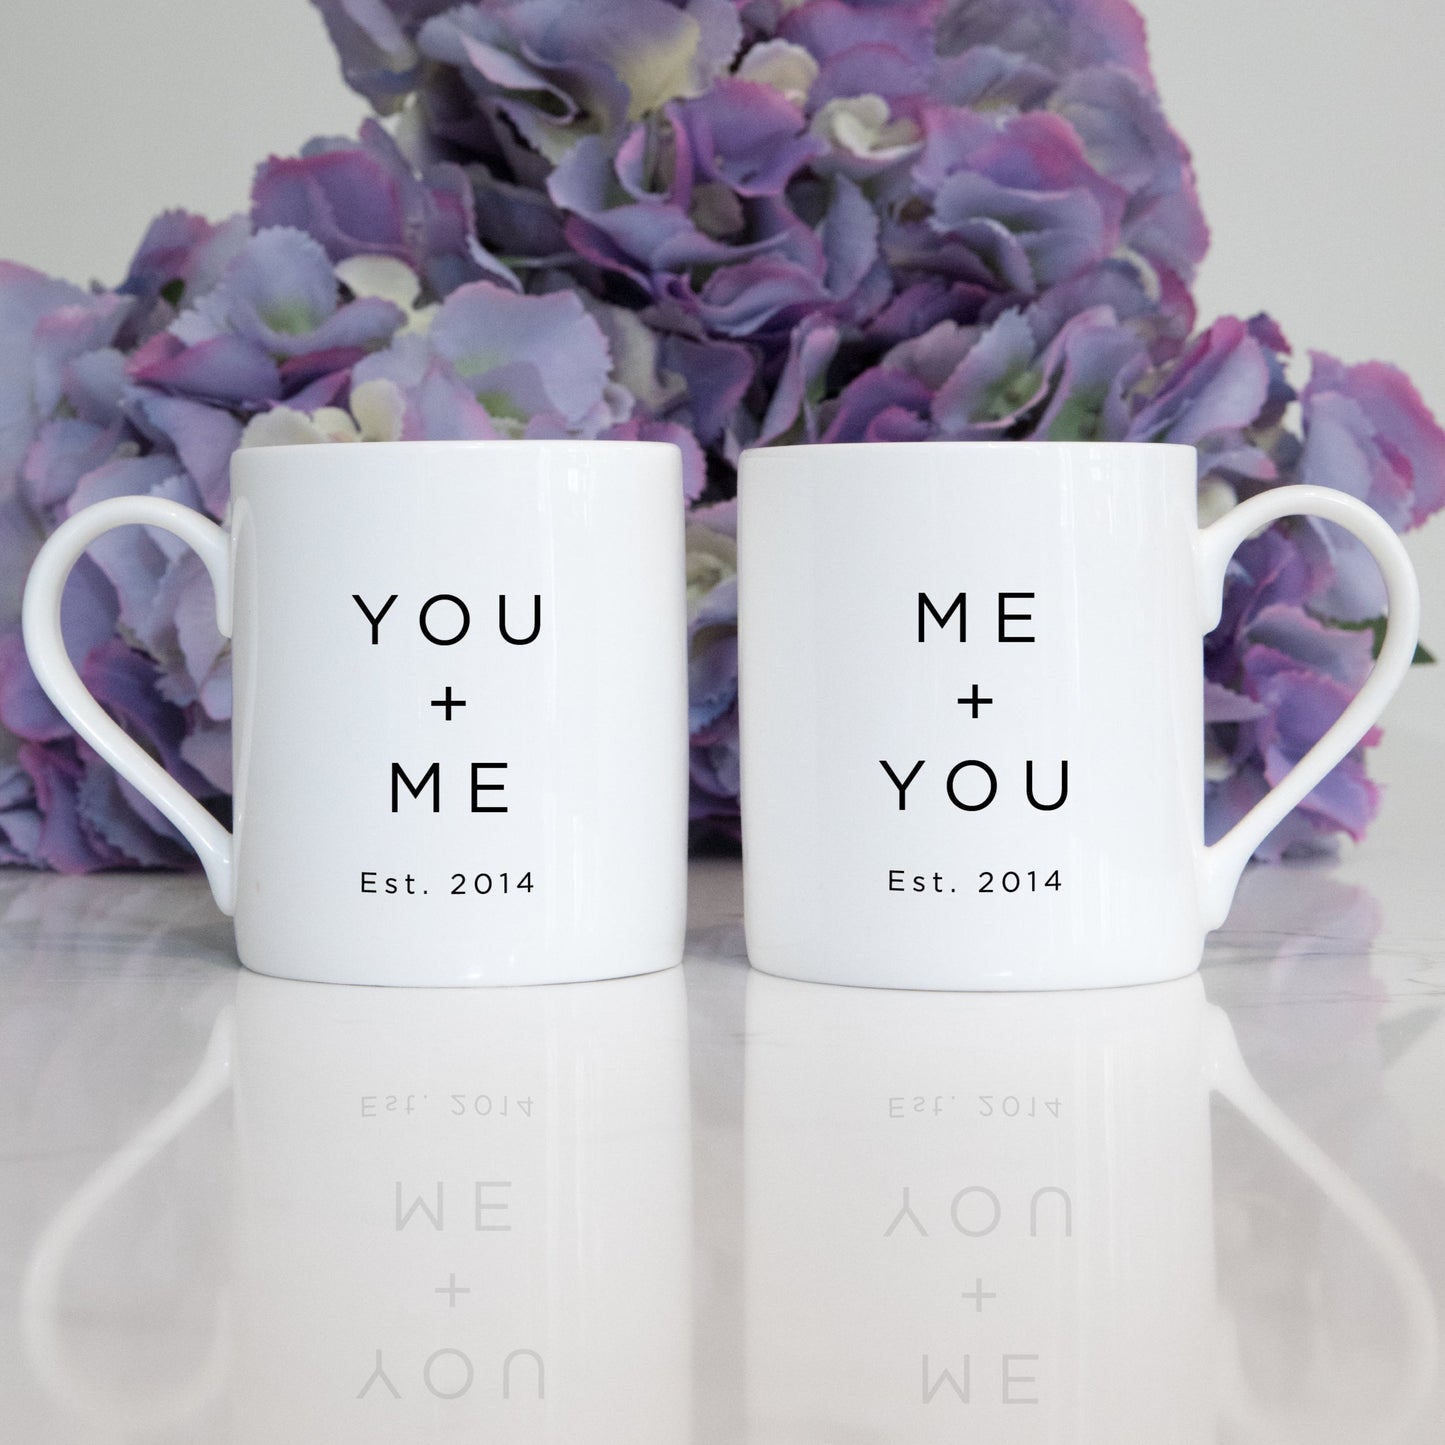 You and me mugs All images and designs © Slice of Pie Designs